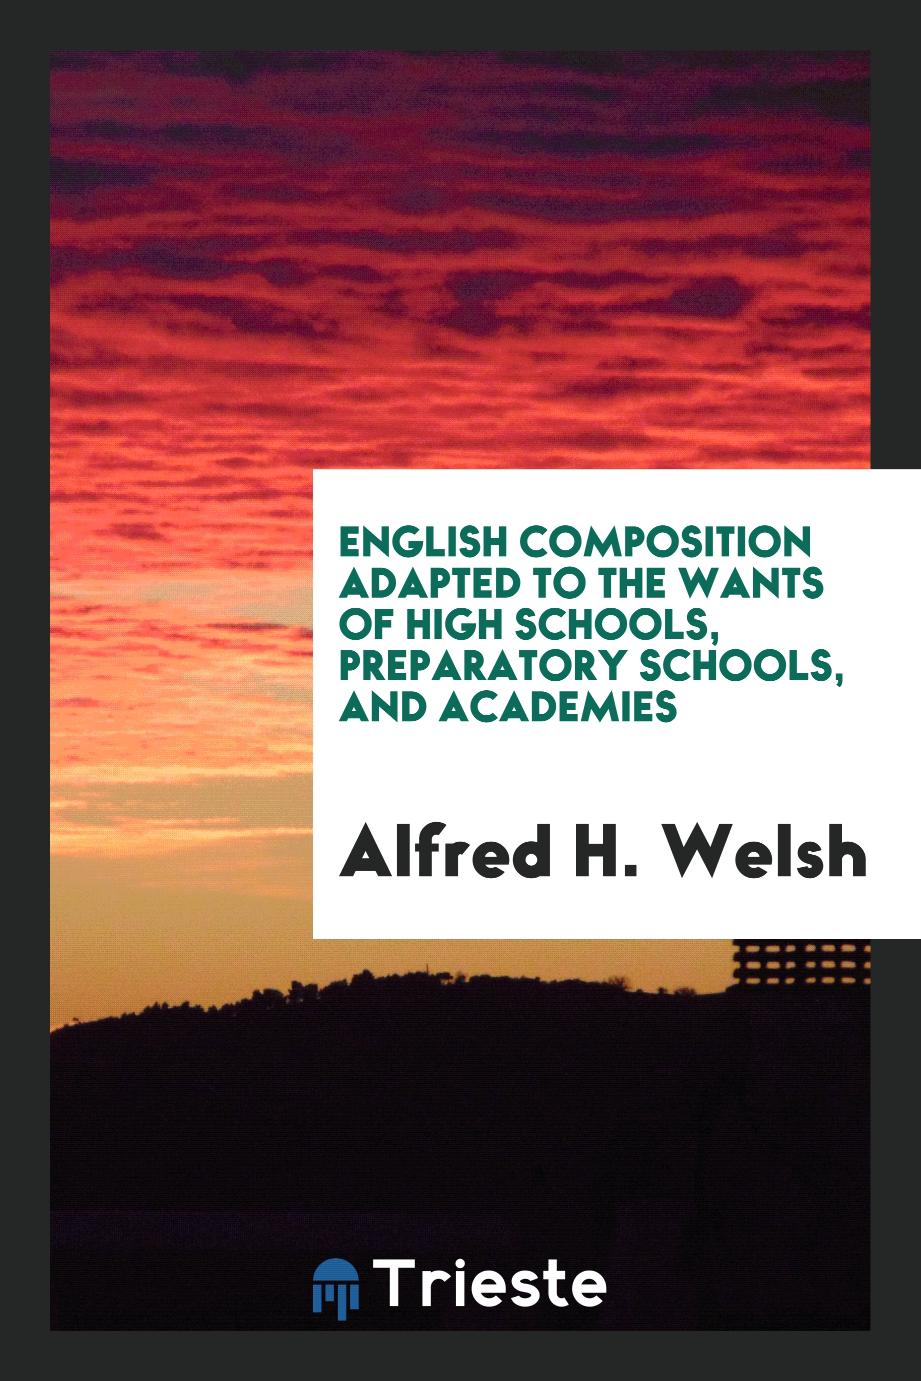 English Composition Adapted to the Wants of High Schools, Preparatory Schools, and Academies